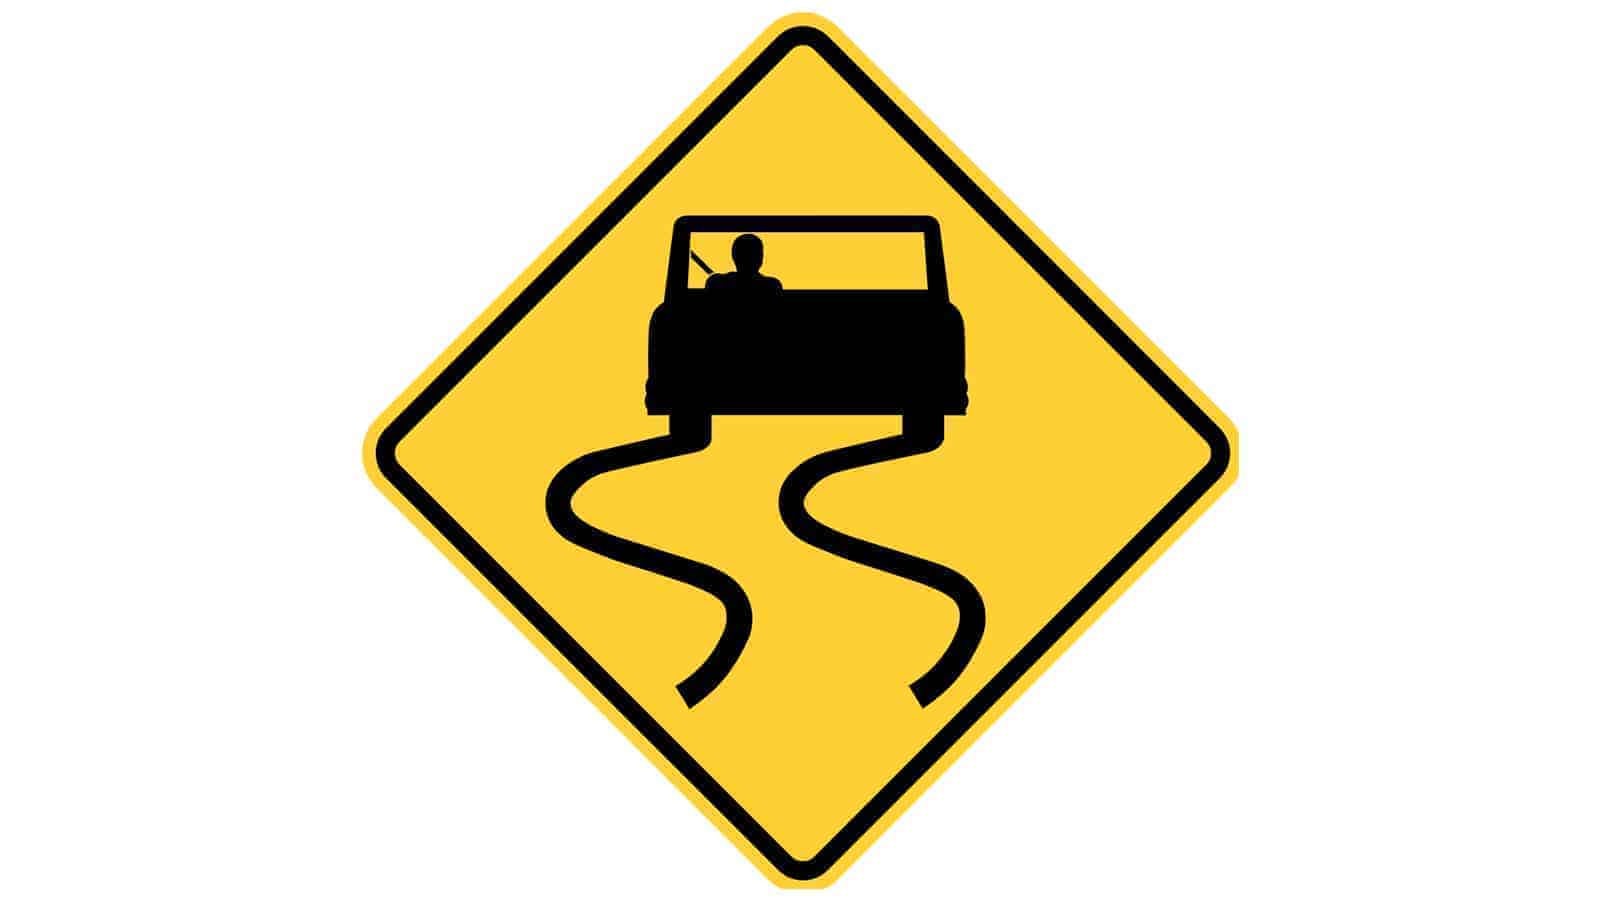 Warning sign Road Slippery When Wet